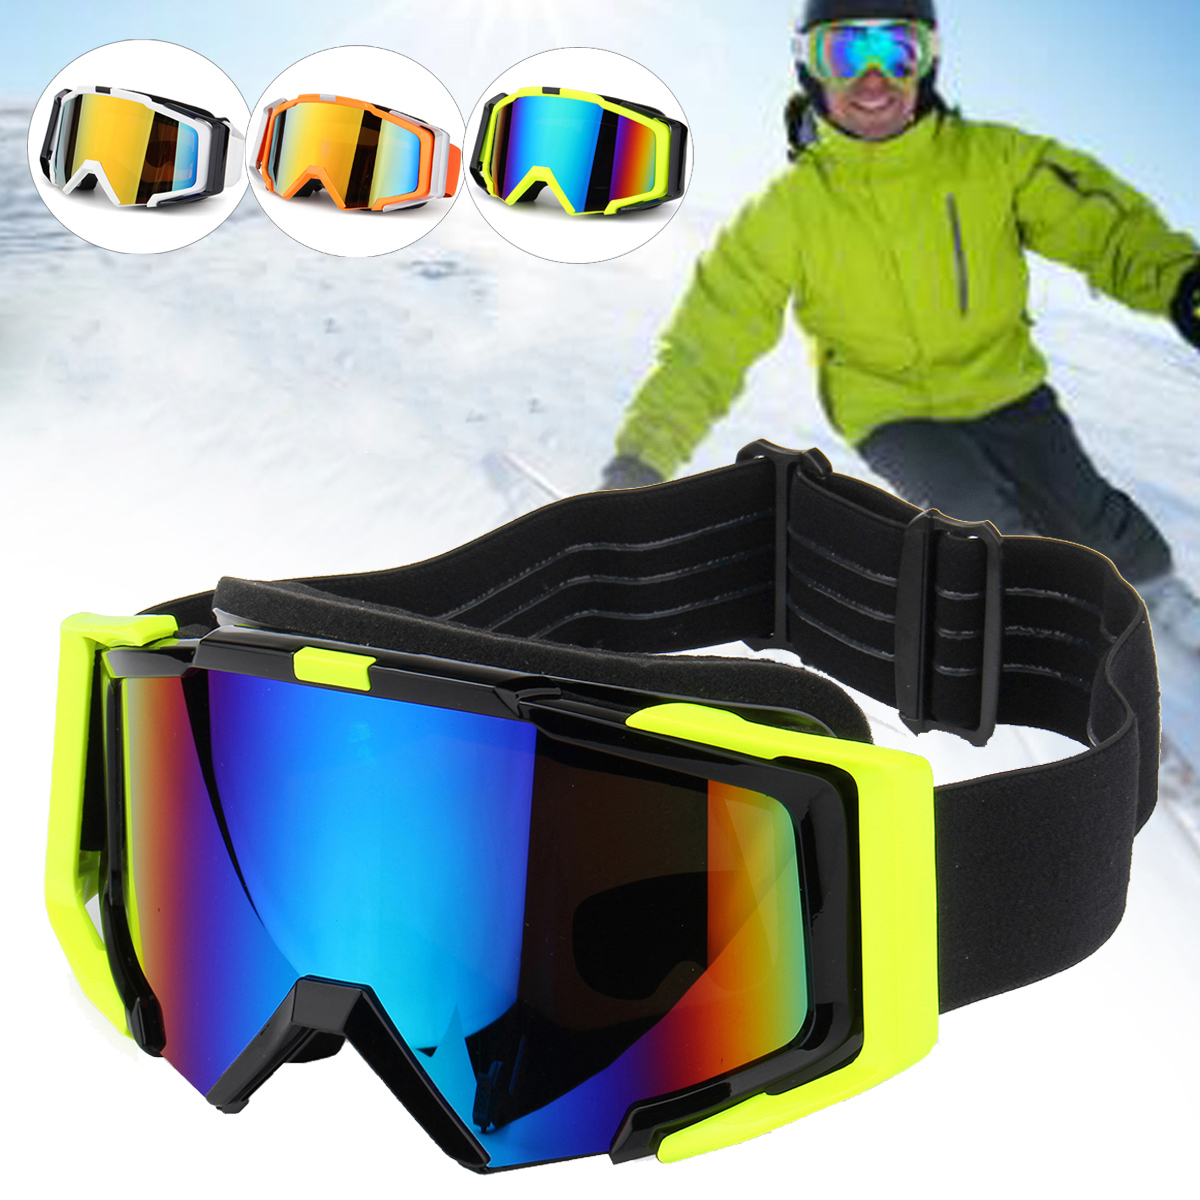 

TYX76 Outdoor Skiing Skating Goggles Snowmobile Glasses Windproof Anti-Fog UV Protection For Men Women Snow Sports Goggles